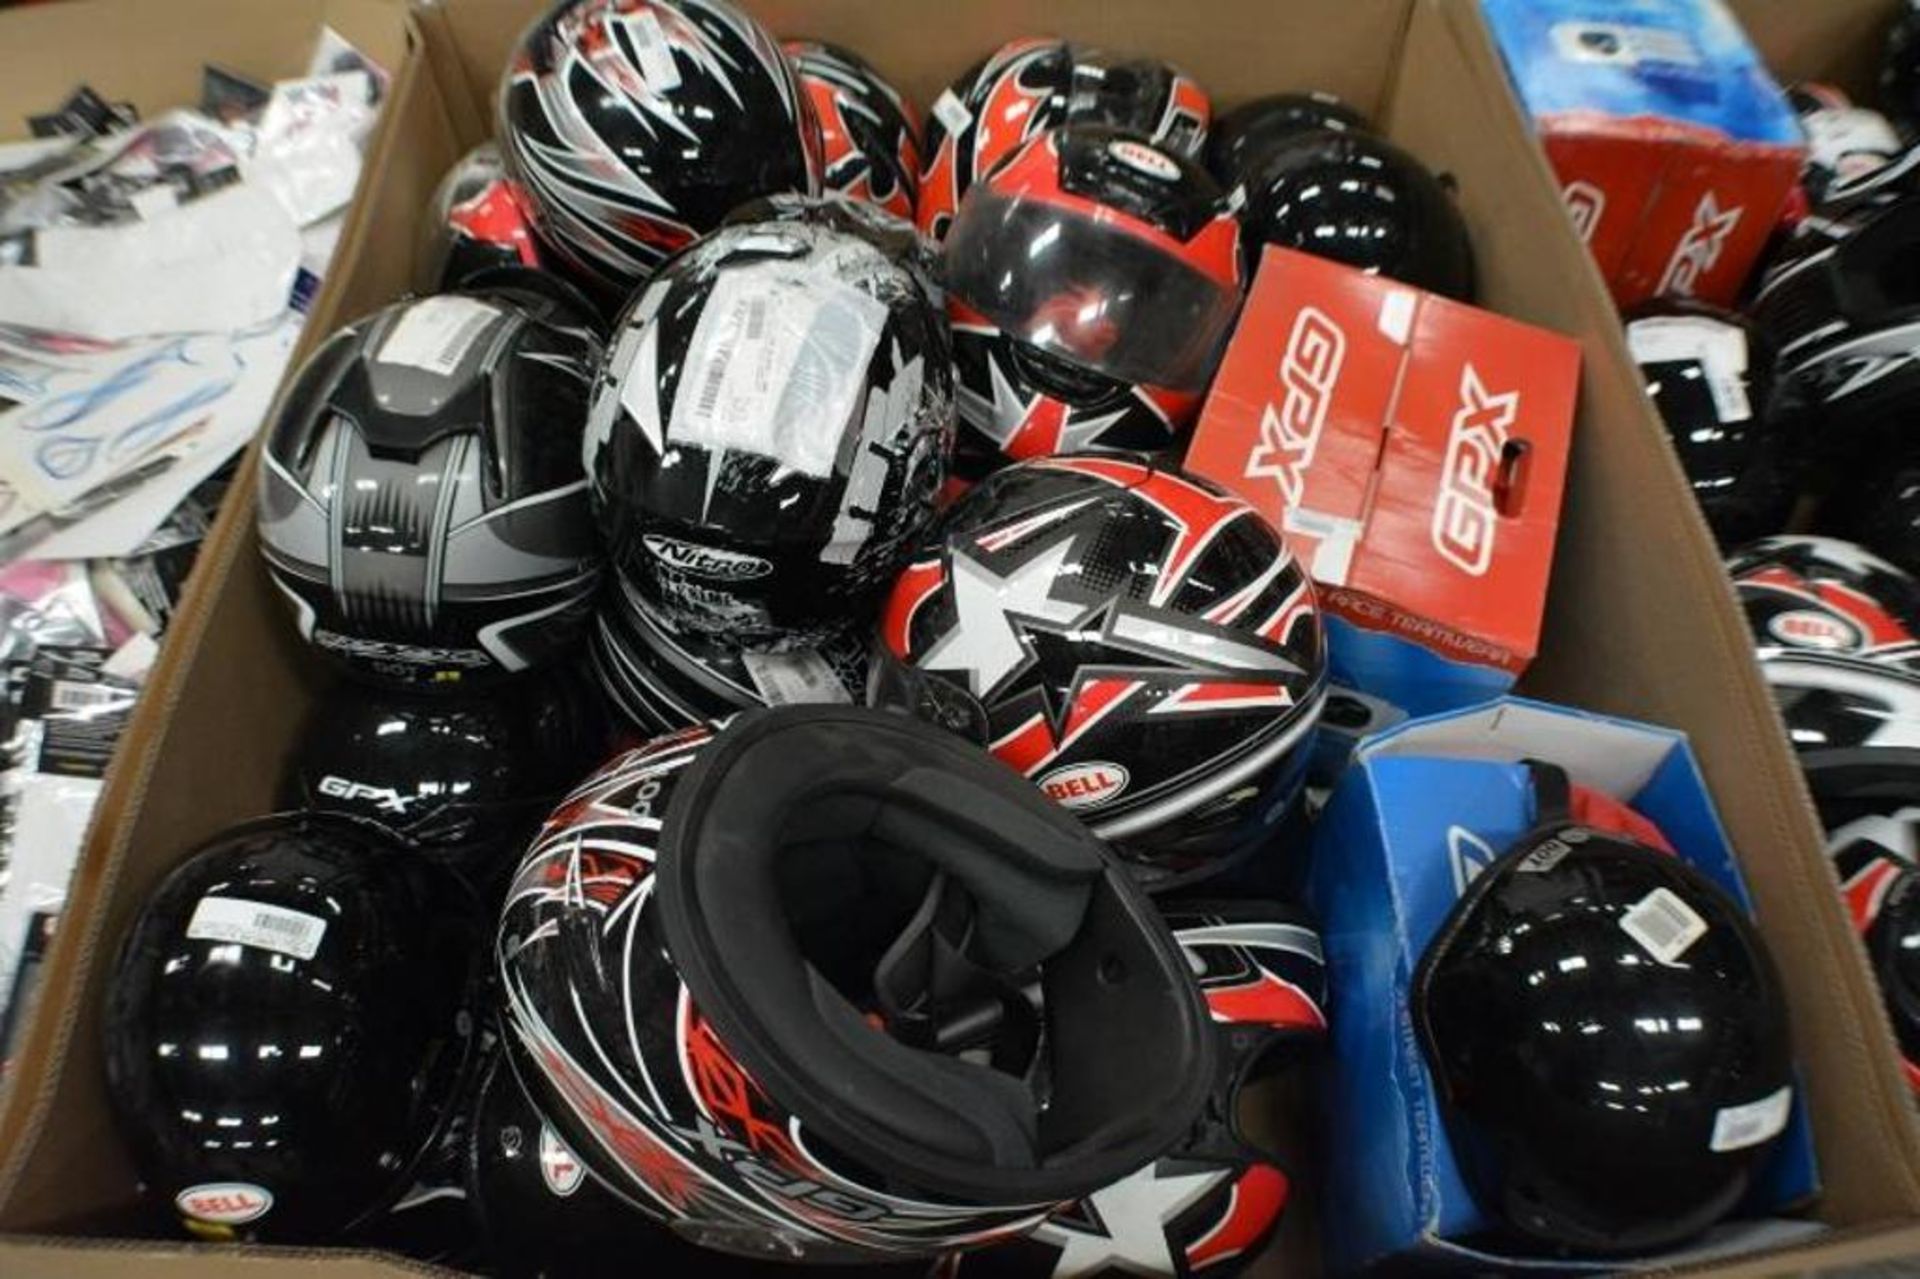 Motorcycle Helmets. Assorted Sizes by GPX and Bell. Contents of Gaylord - Image 3 of 3